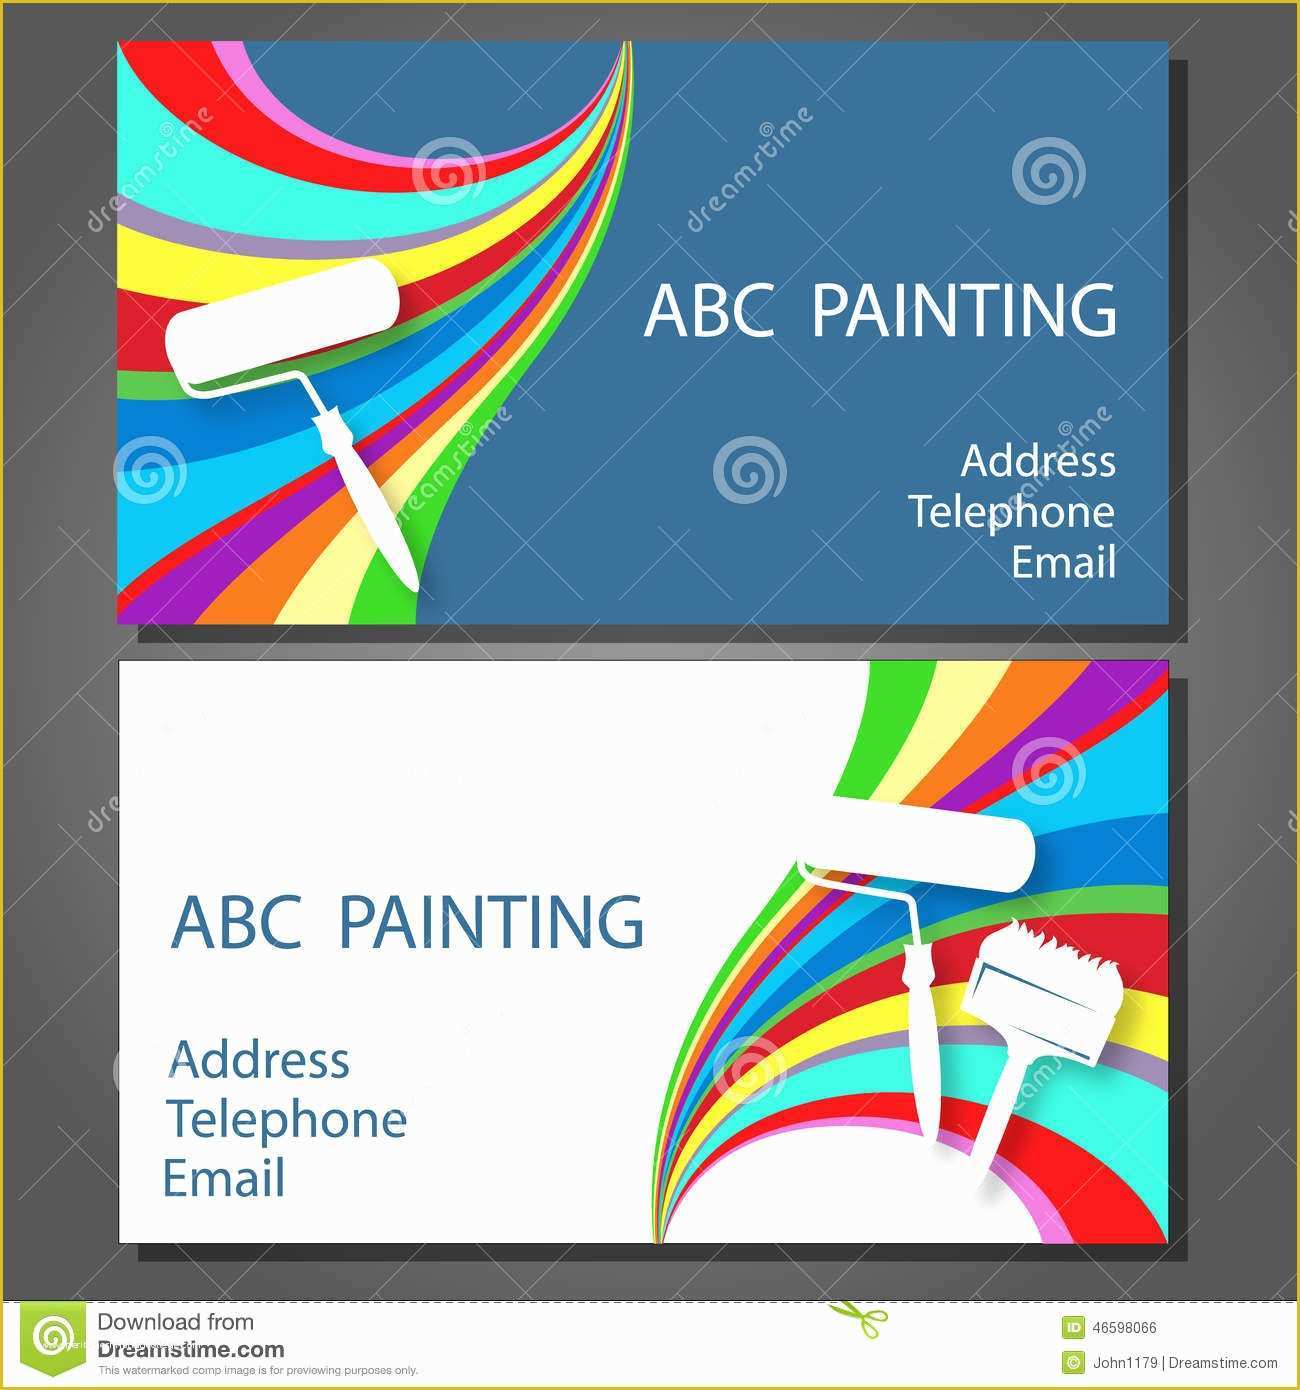 Painting Company Website Templates Free Download Of Business Card for Painting Stock Vector Image